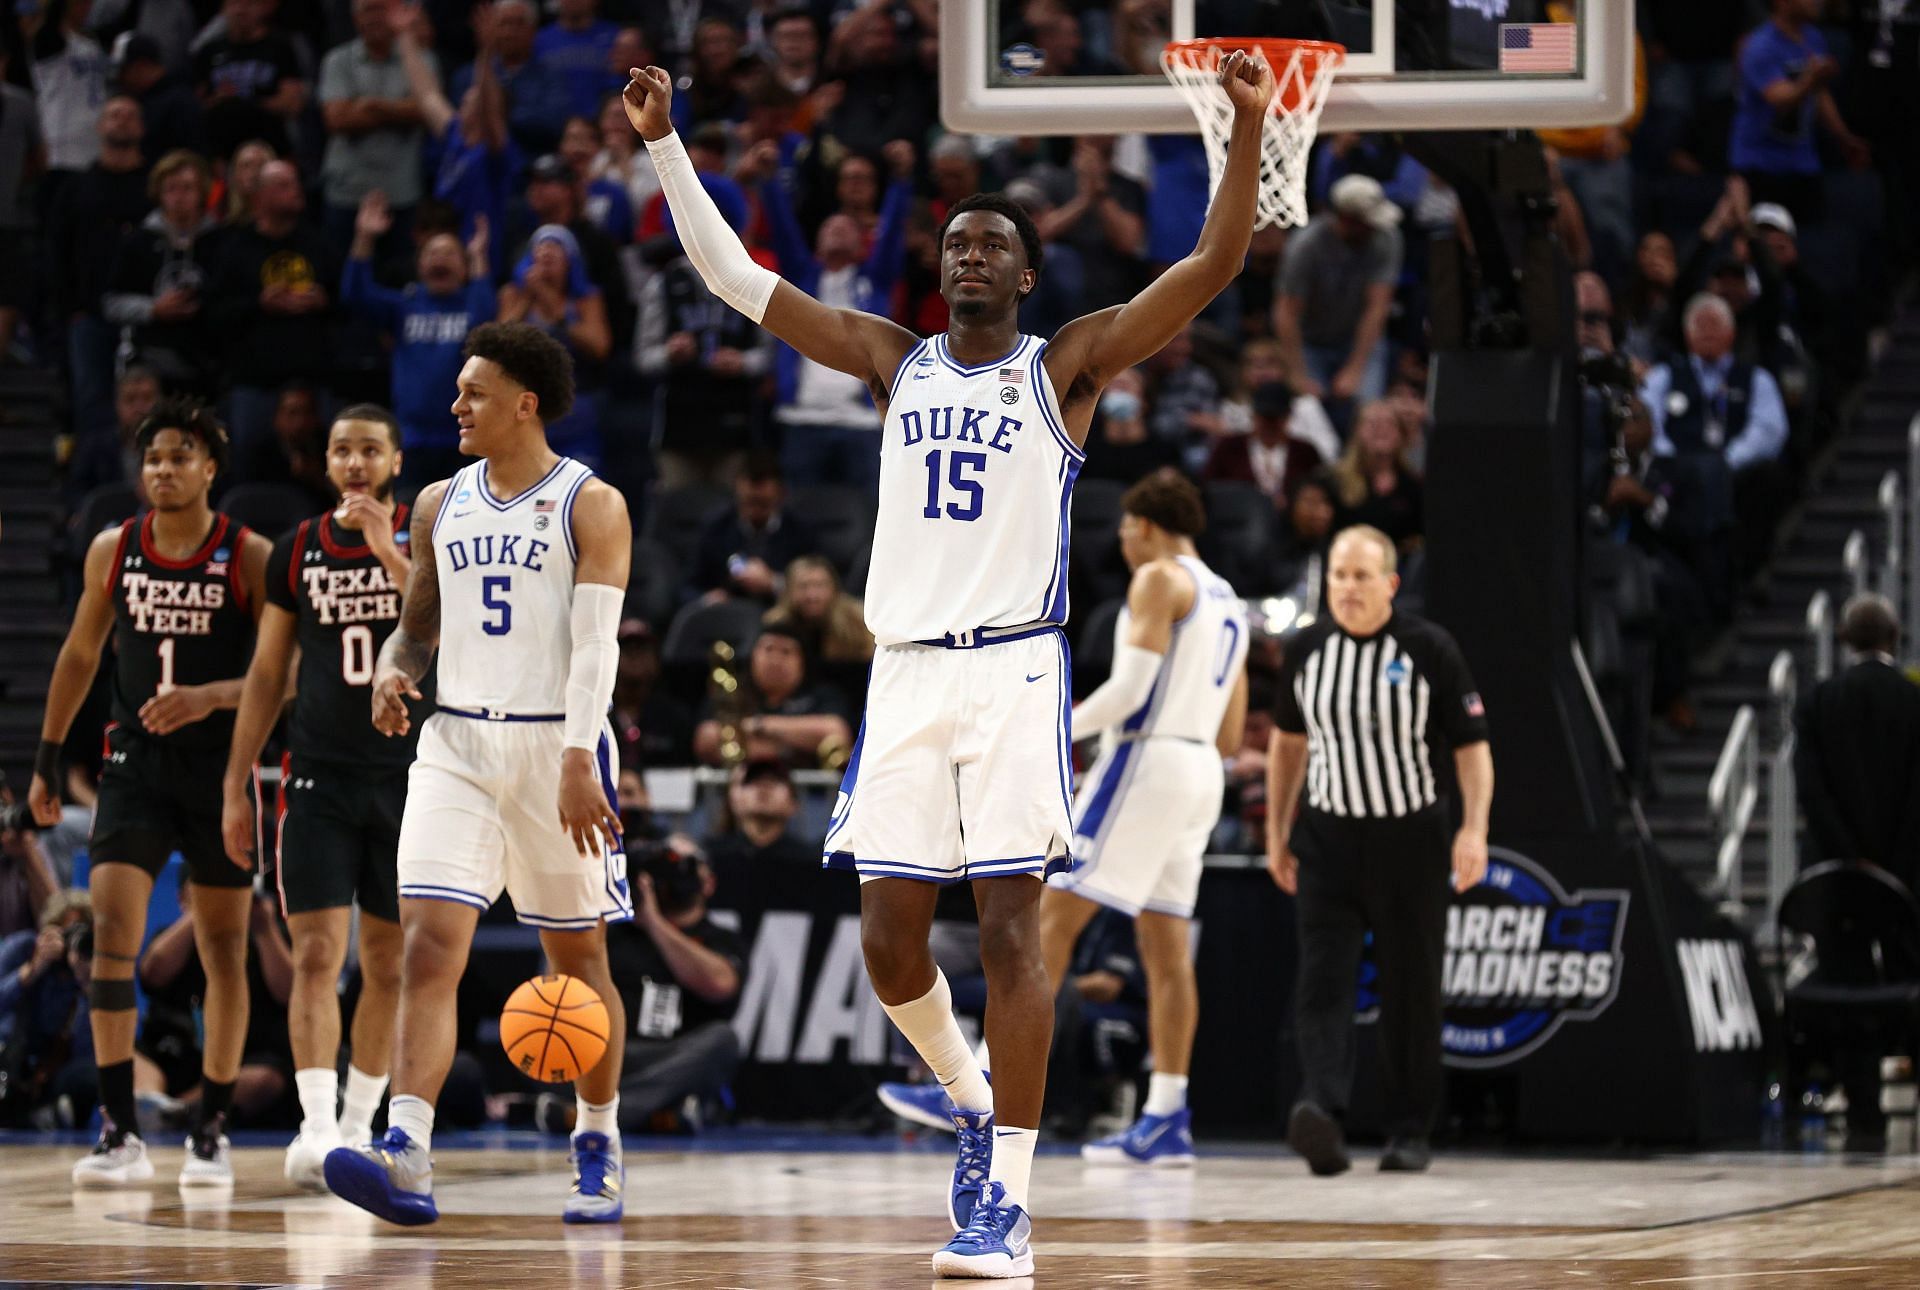 Duke sophomore Mark Williams has the attention of NBA scouts.